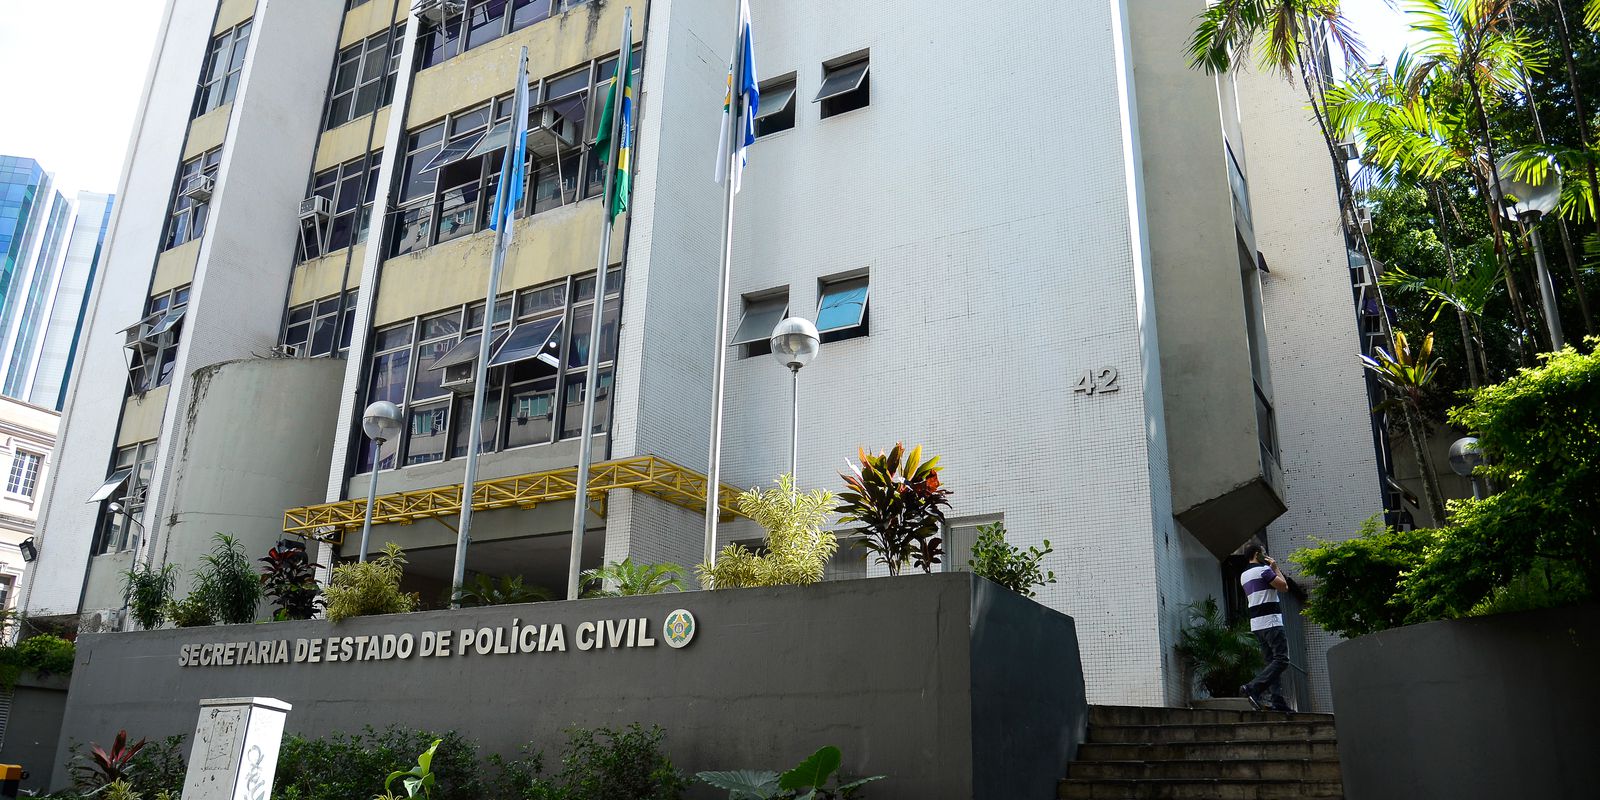 MP denounces Rio's civil police officer and police obstruction of justice